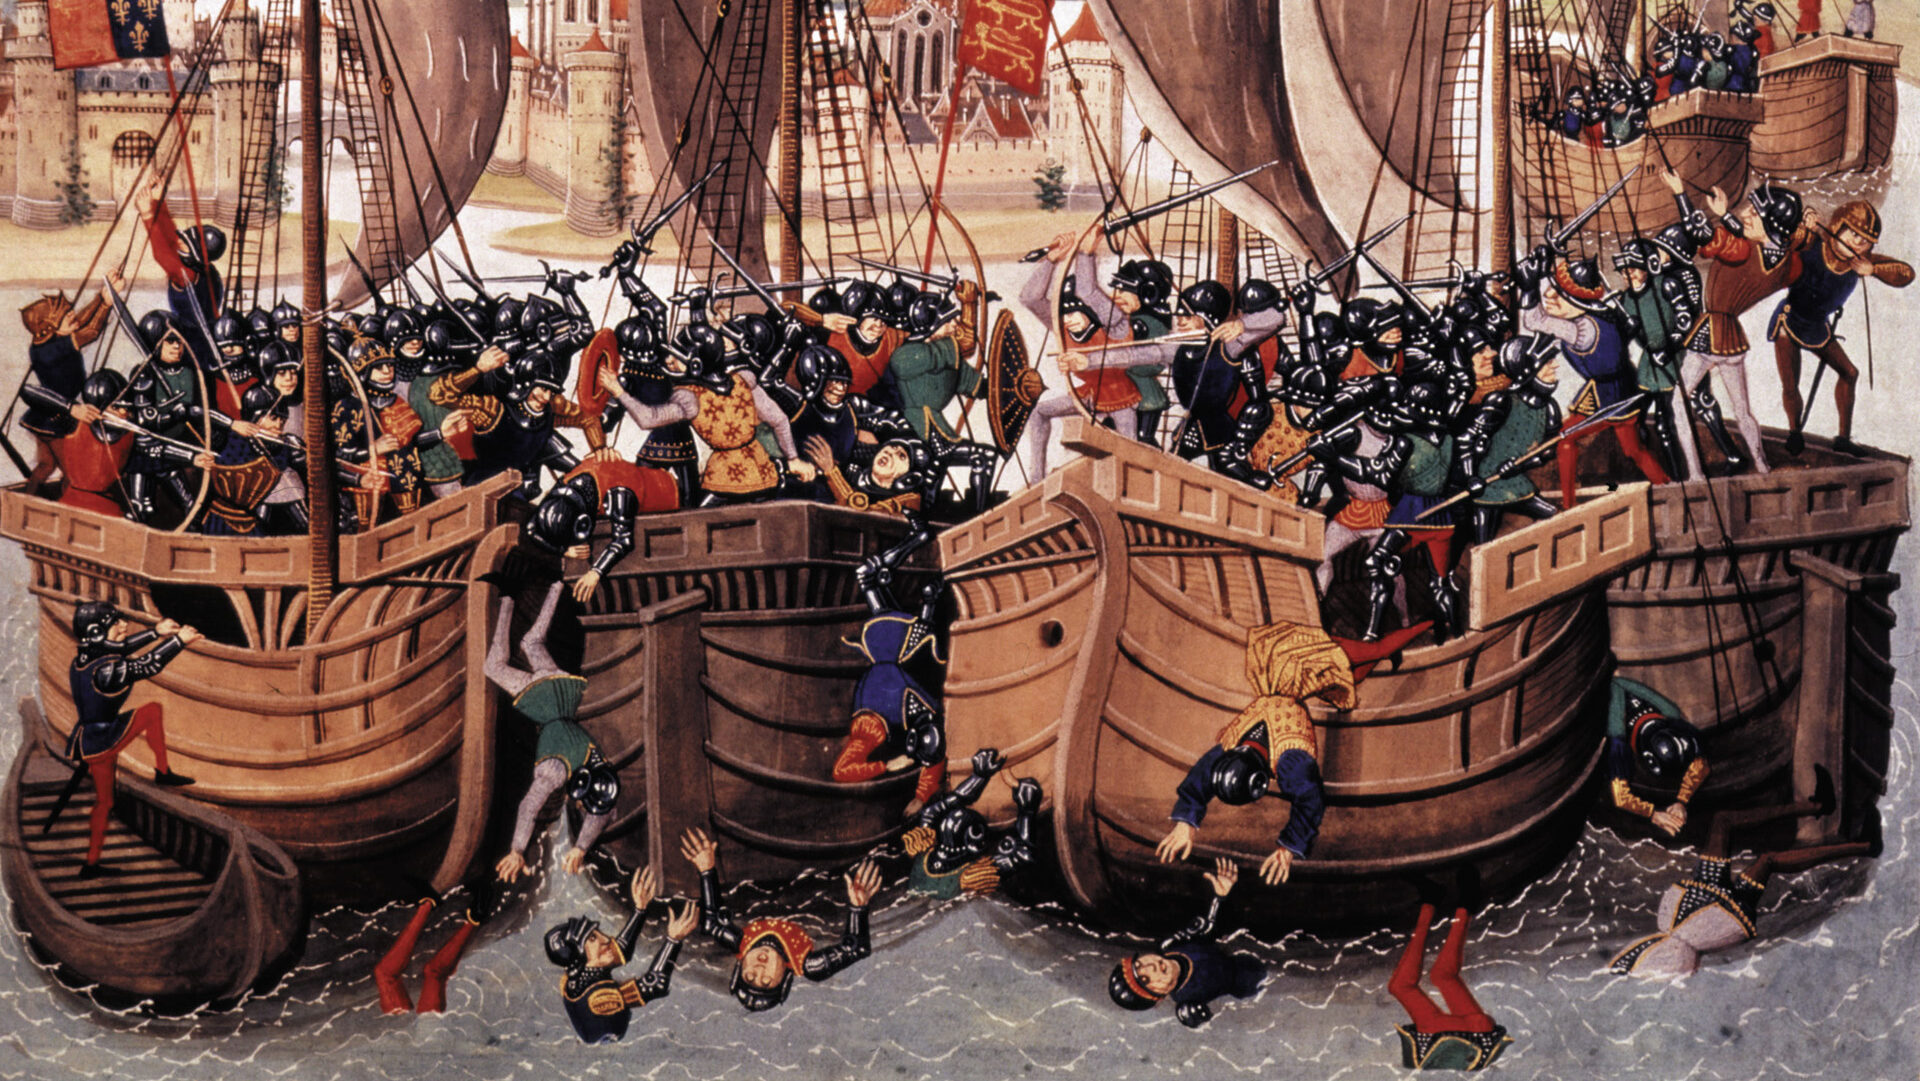 A colorful illustration depicting the naval Battle of Sluys attempts to demonstrate the common tactic of maneuvering the ships to touching and then letting onboard combatants fight it out like infantry. The battle was an early struggle of the Hundred Years’ War. OPPOSITE: Edward III warred with France to win its crown. He was 38 at the time of Sluys.